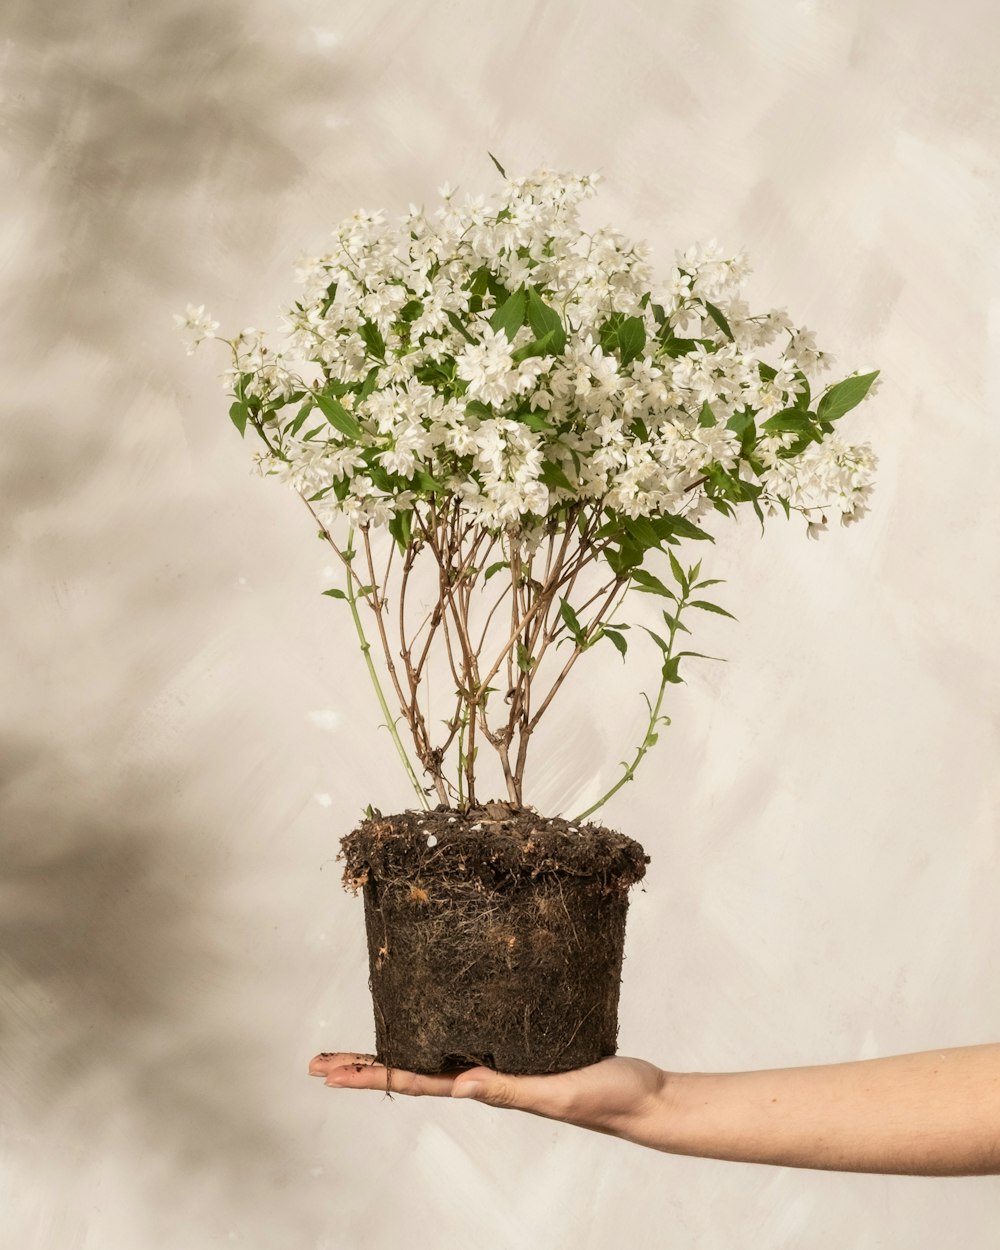 a person holding a potted plant with white flowers